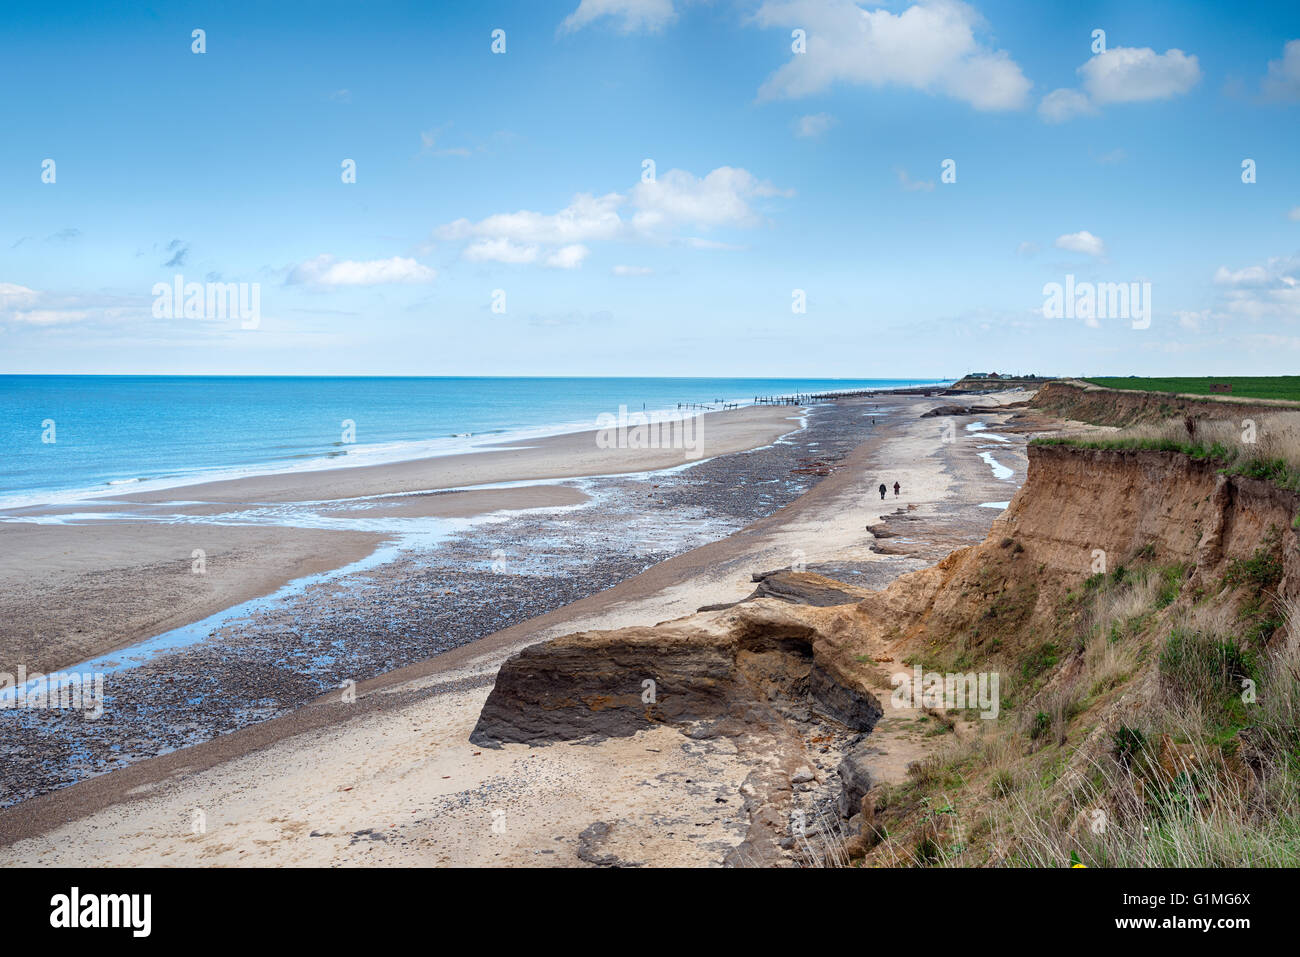 Crumbling cliffs and sea erosion at Happisburgh on the Norfolk coast Stock Photo